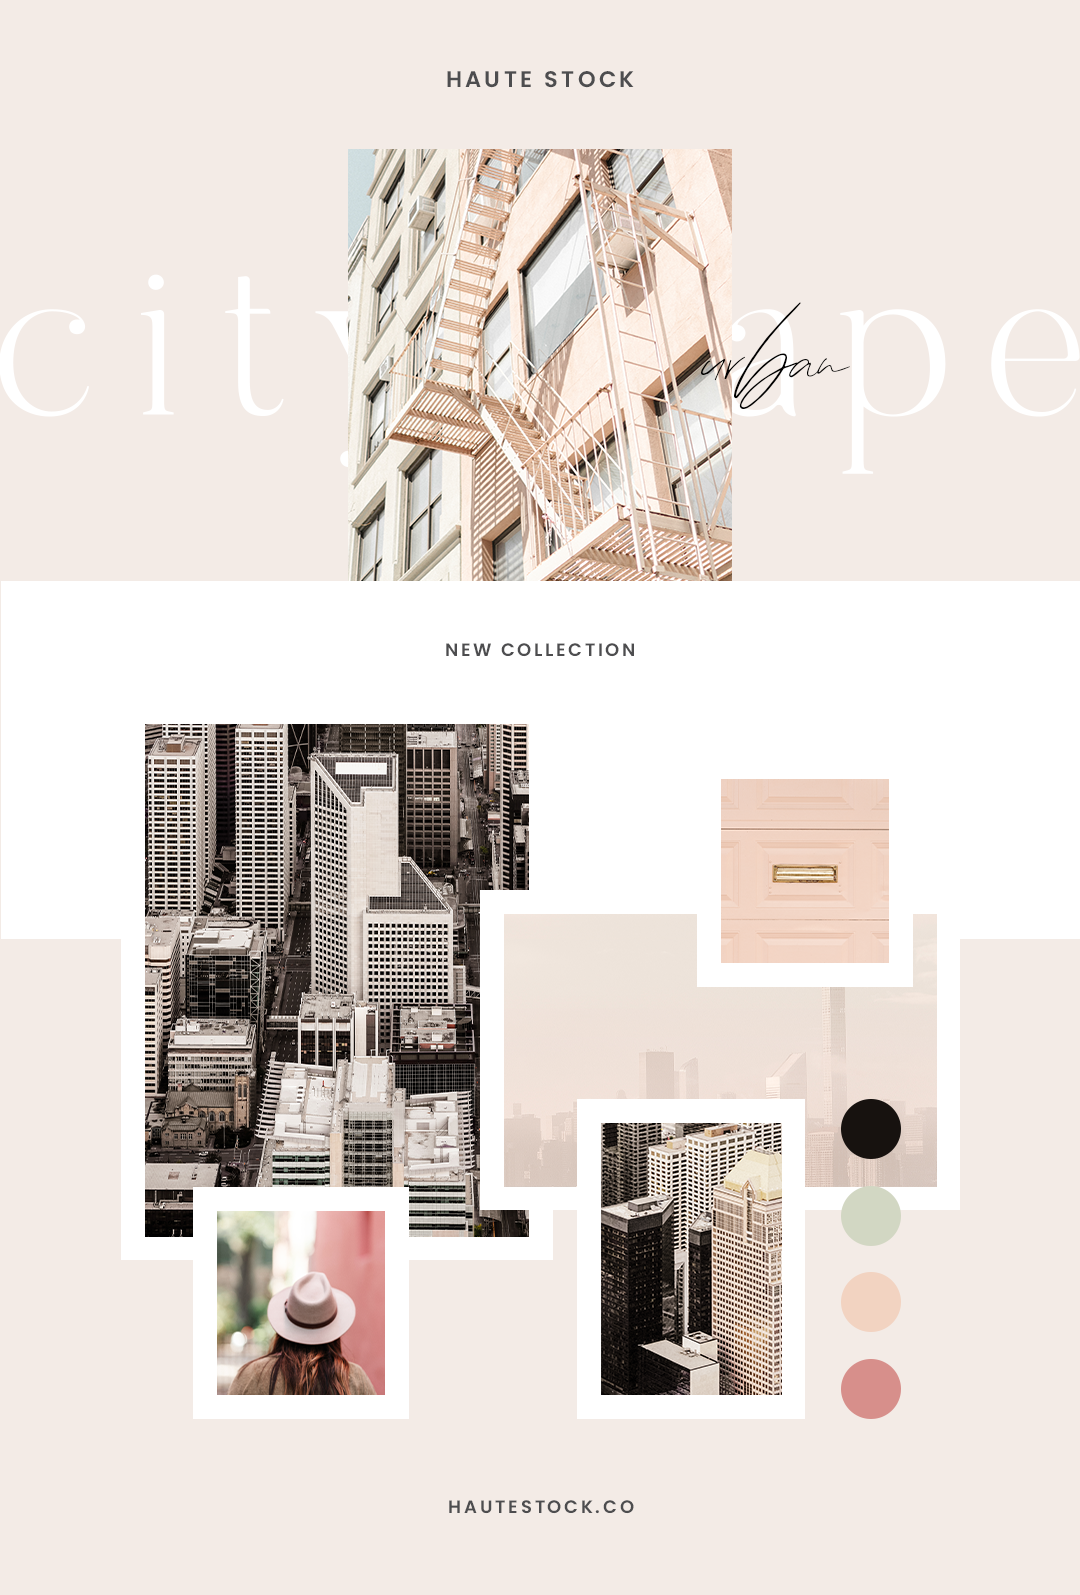 Urban cityscape stock photos with a peach, pink, and dusty rose color palette. Use these stock images for lifestyle blog posts about modern city life and travel. You can also use them to add texture and interesting lines to marketing materials. Avai…